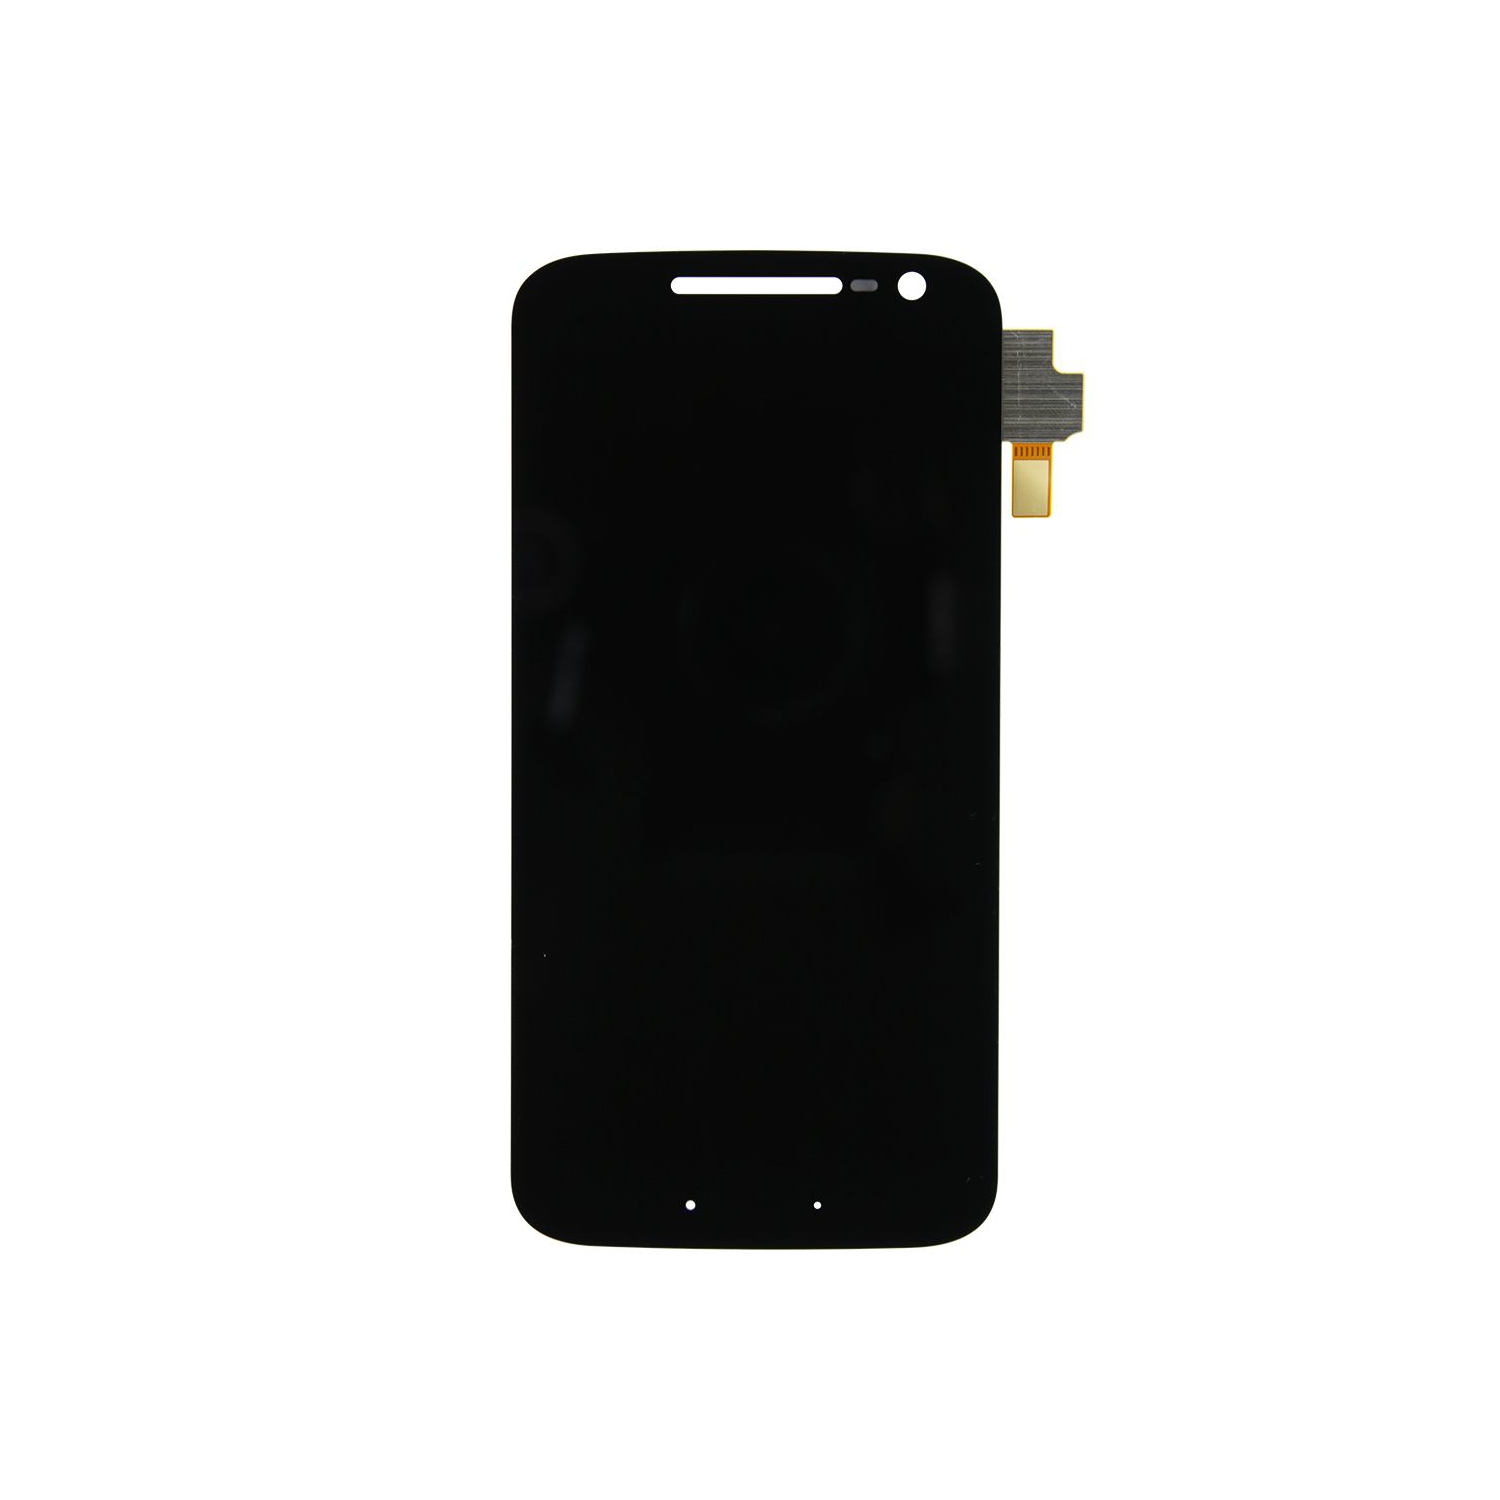 Motorola Moto G4 LCD Screen Ditizer Touch Display Full Assembly - Black